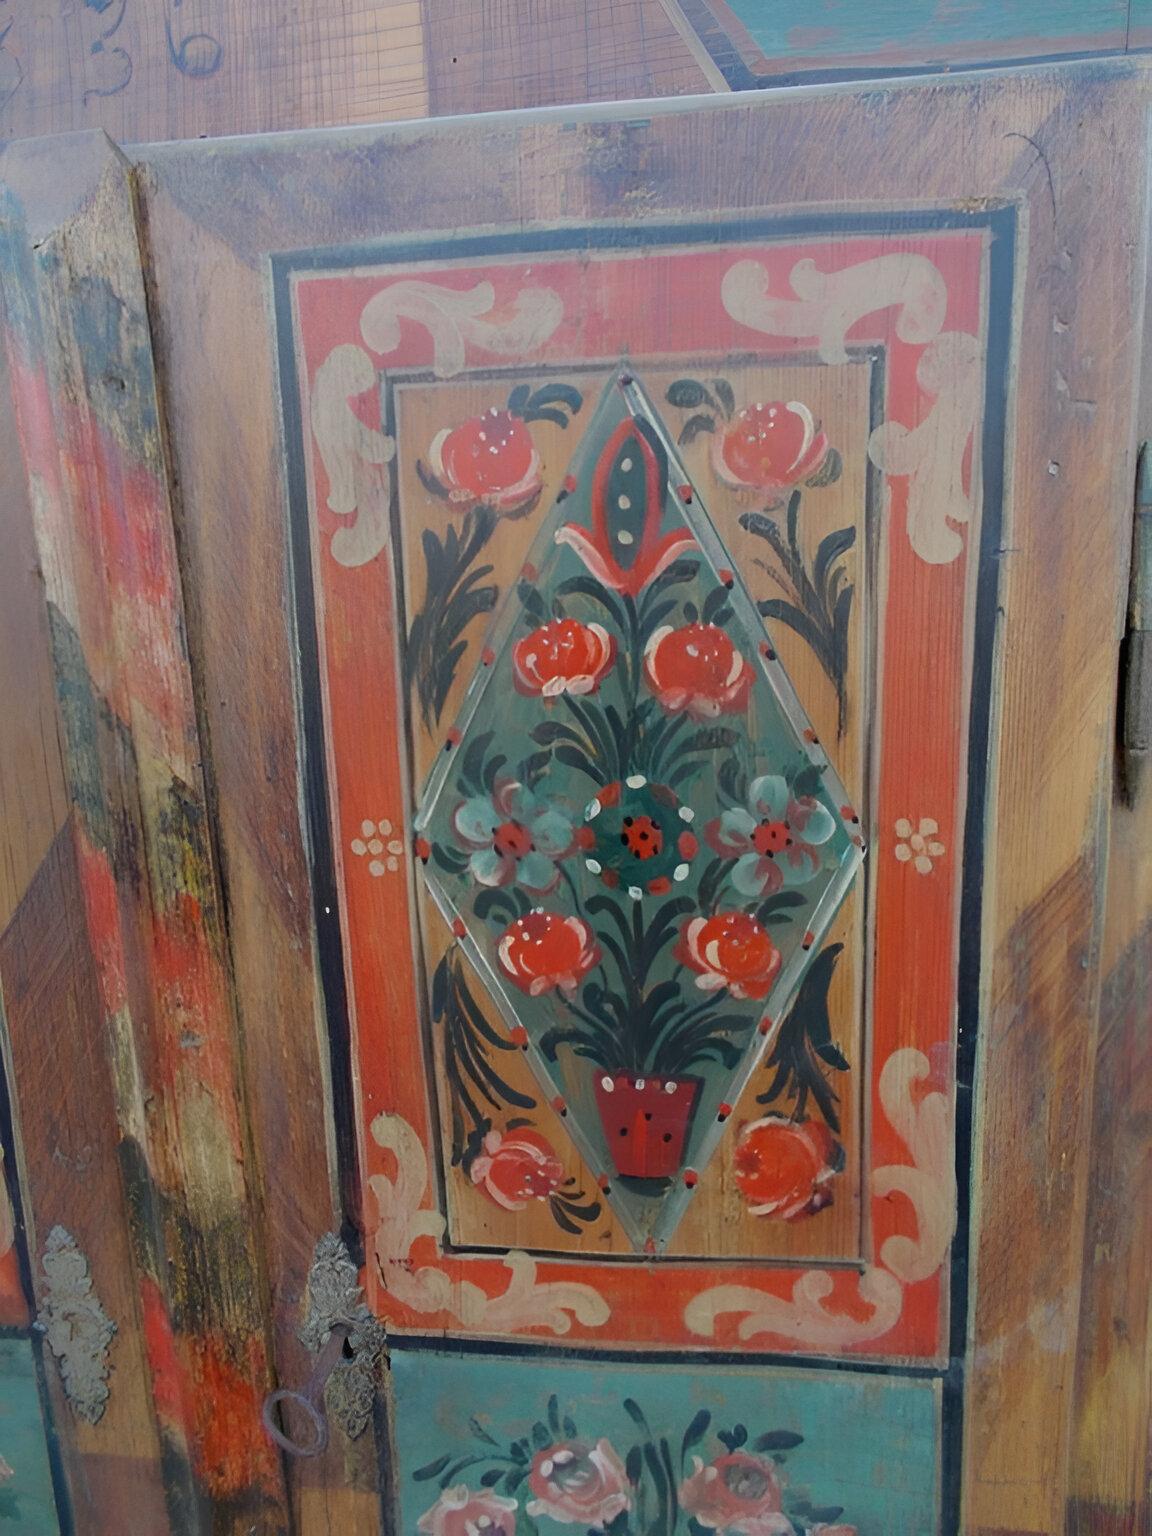 Decorated fir cabinet dated 1836.
Original painting in perfect aesthetic condition.
Original hardware.
Openable storage room underneath.
Available with shelves or hangers.
Reference measurements at the frame.

More pictures and information at